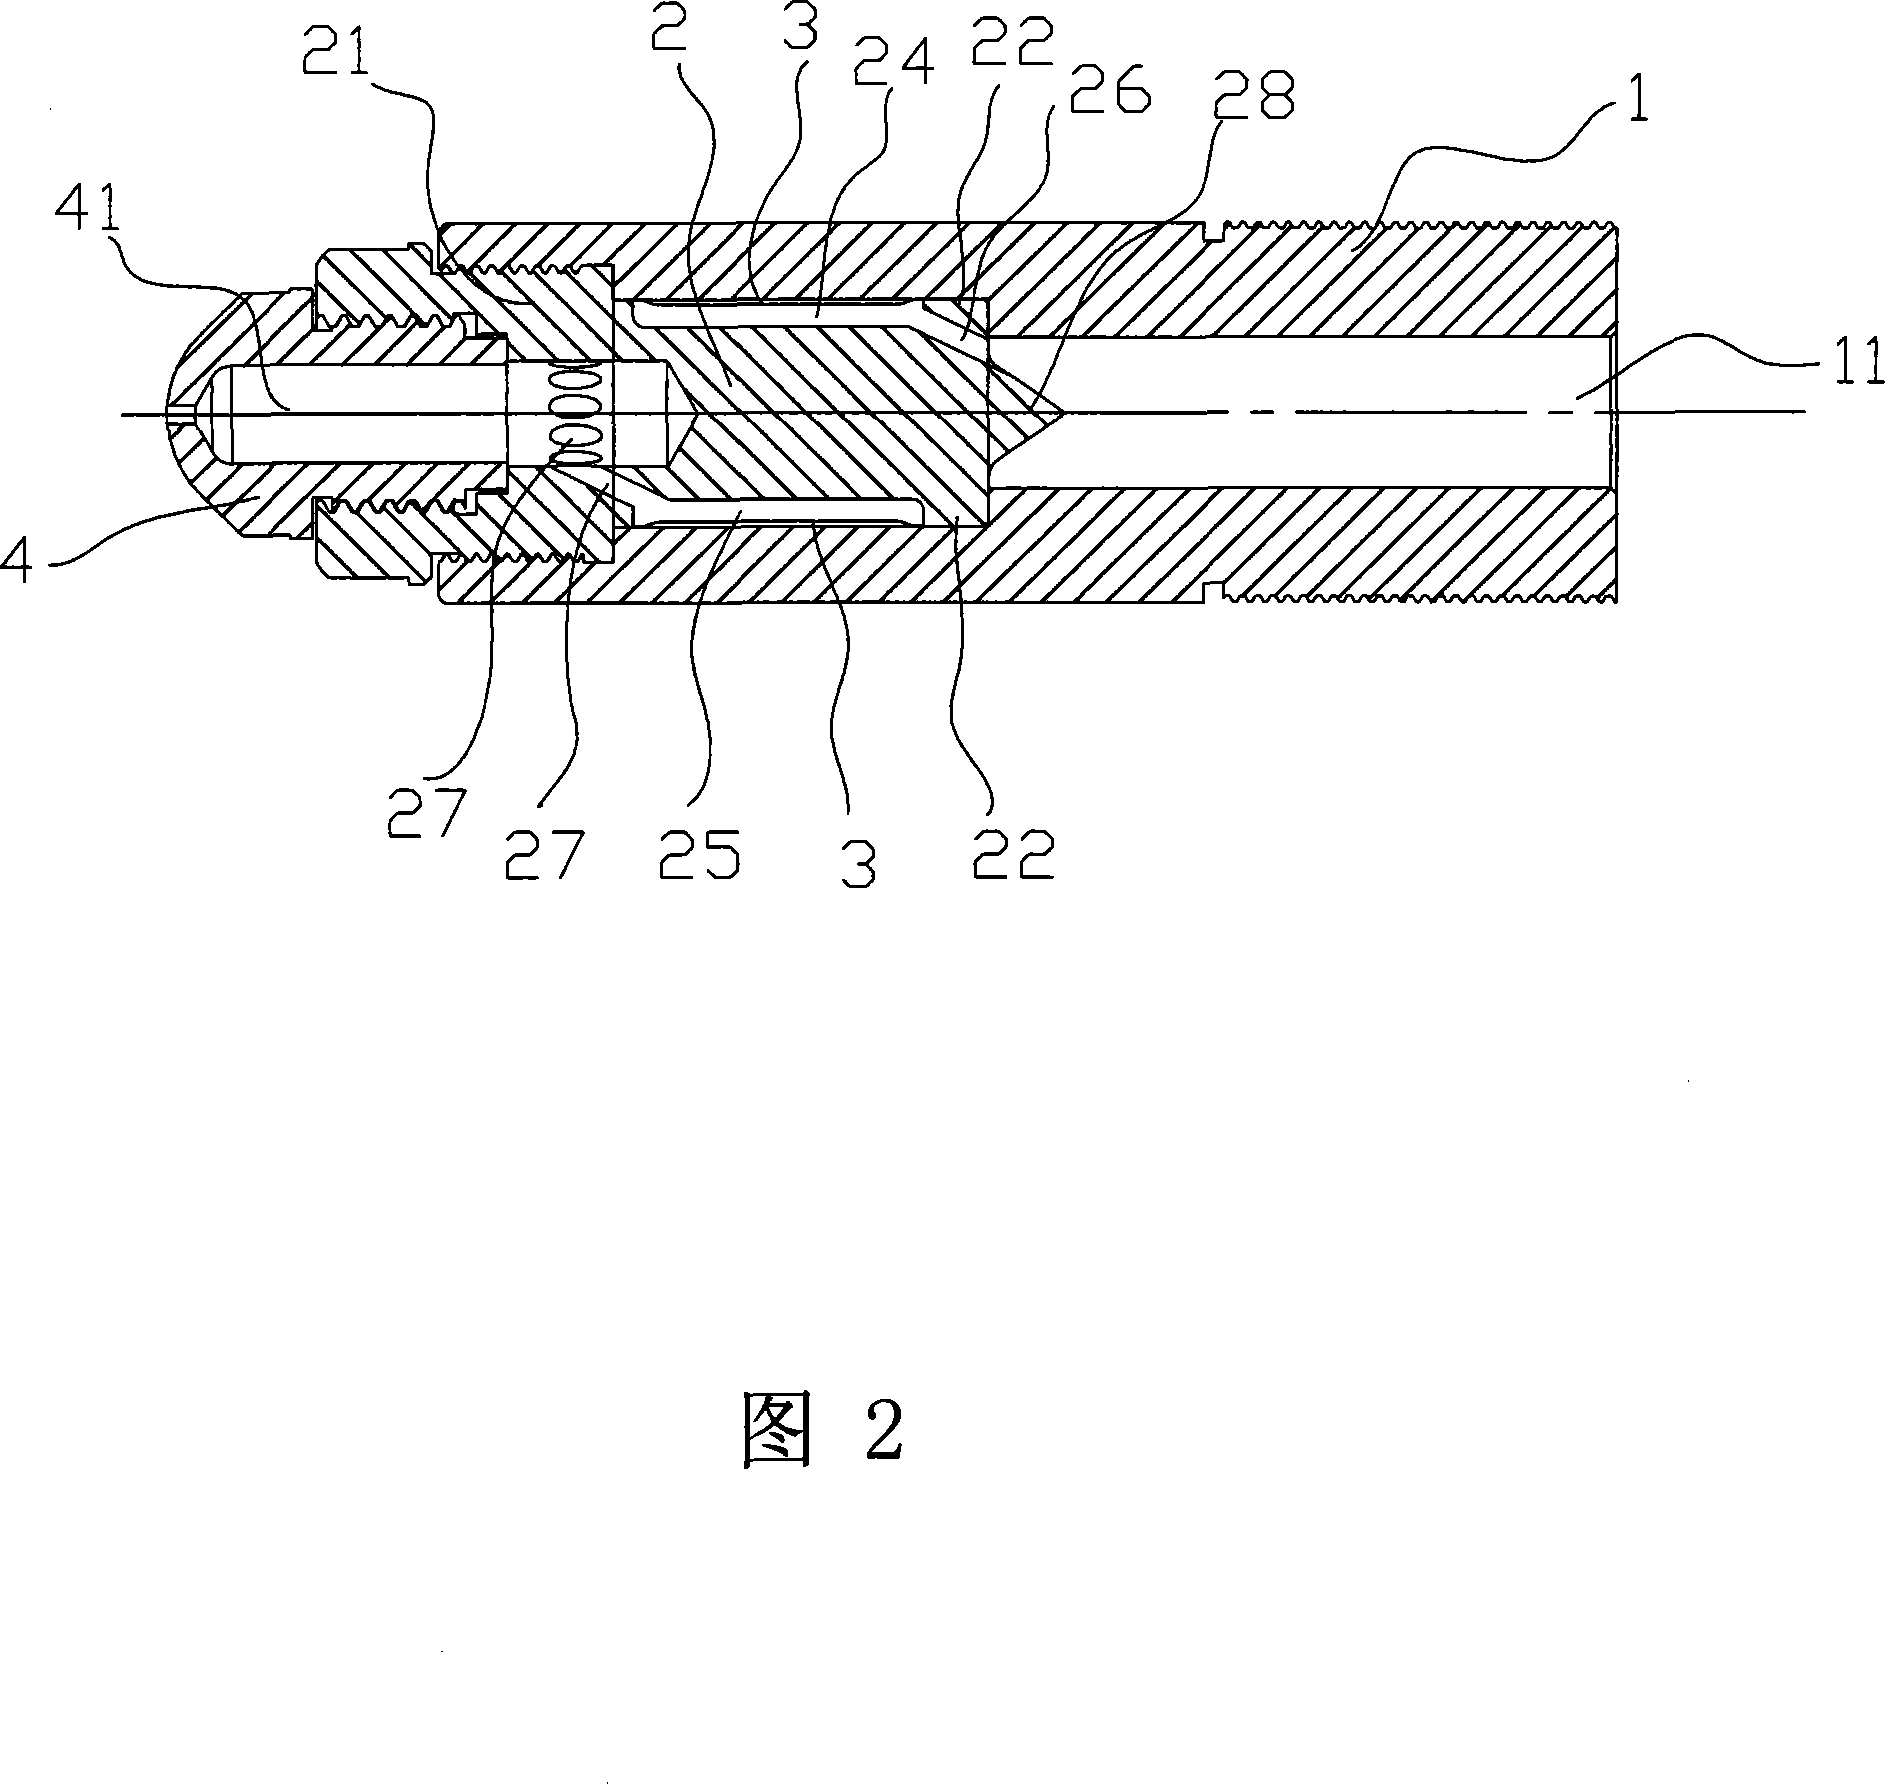 Injection molding nozzle with filter